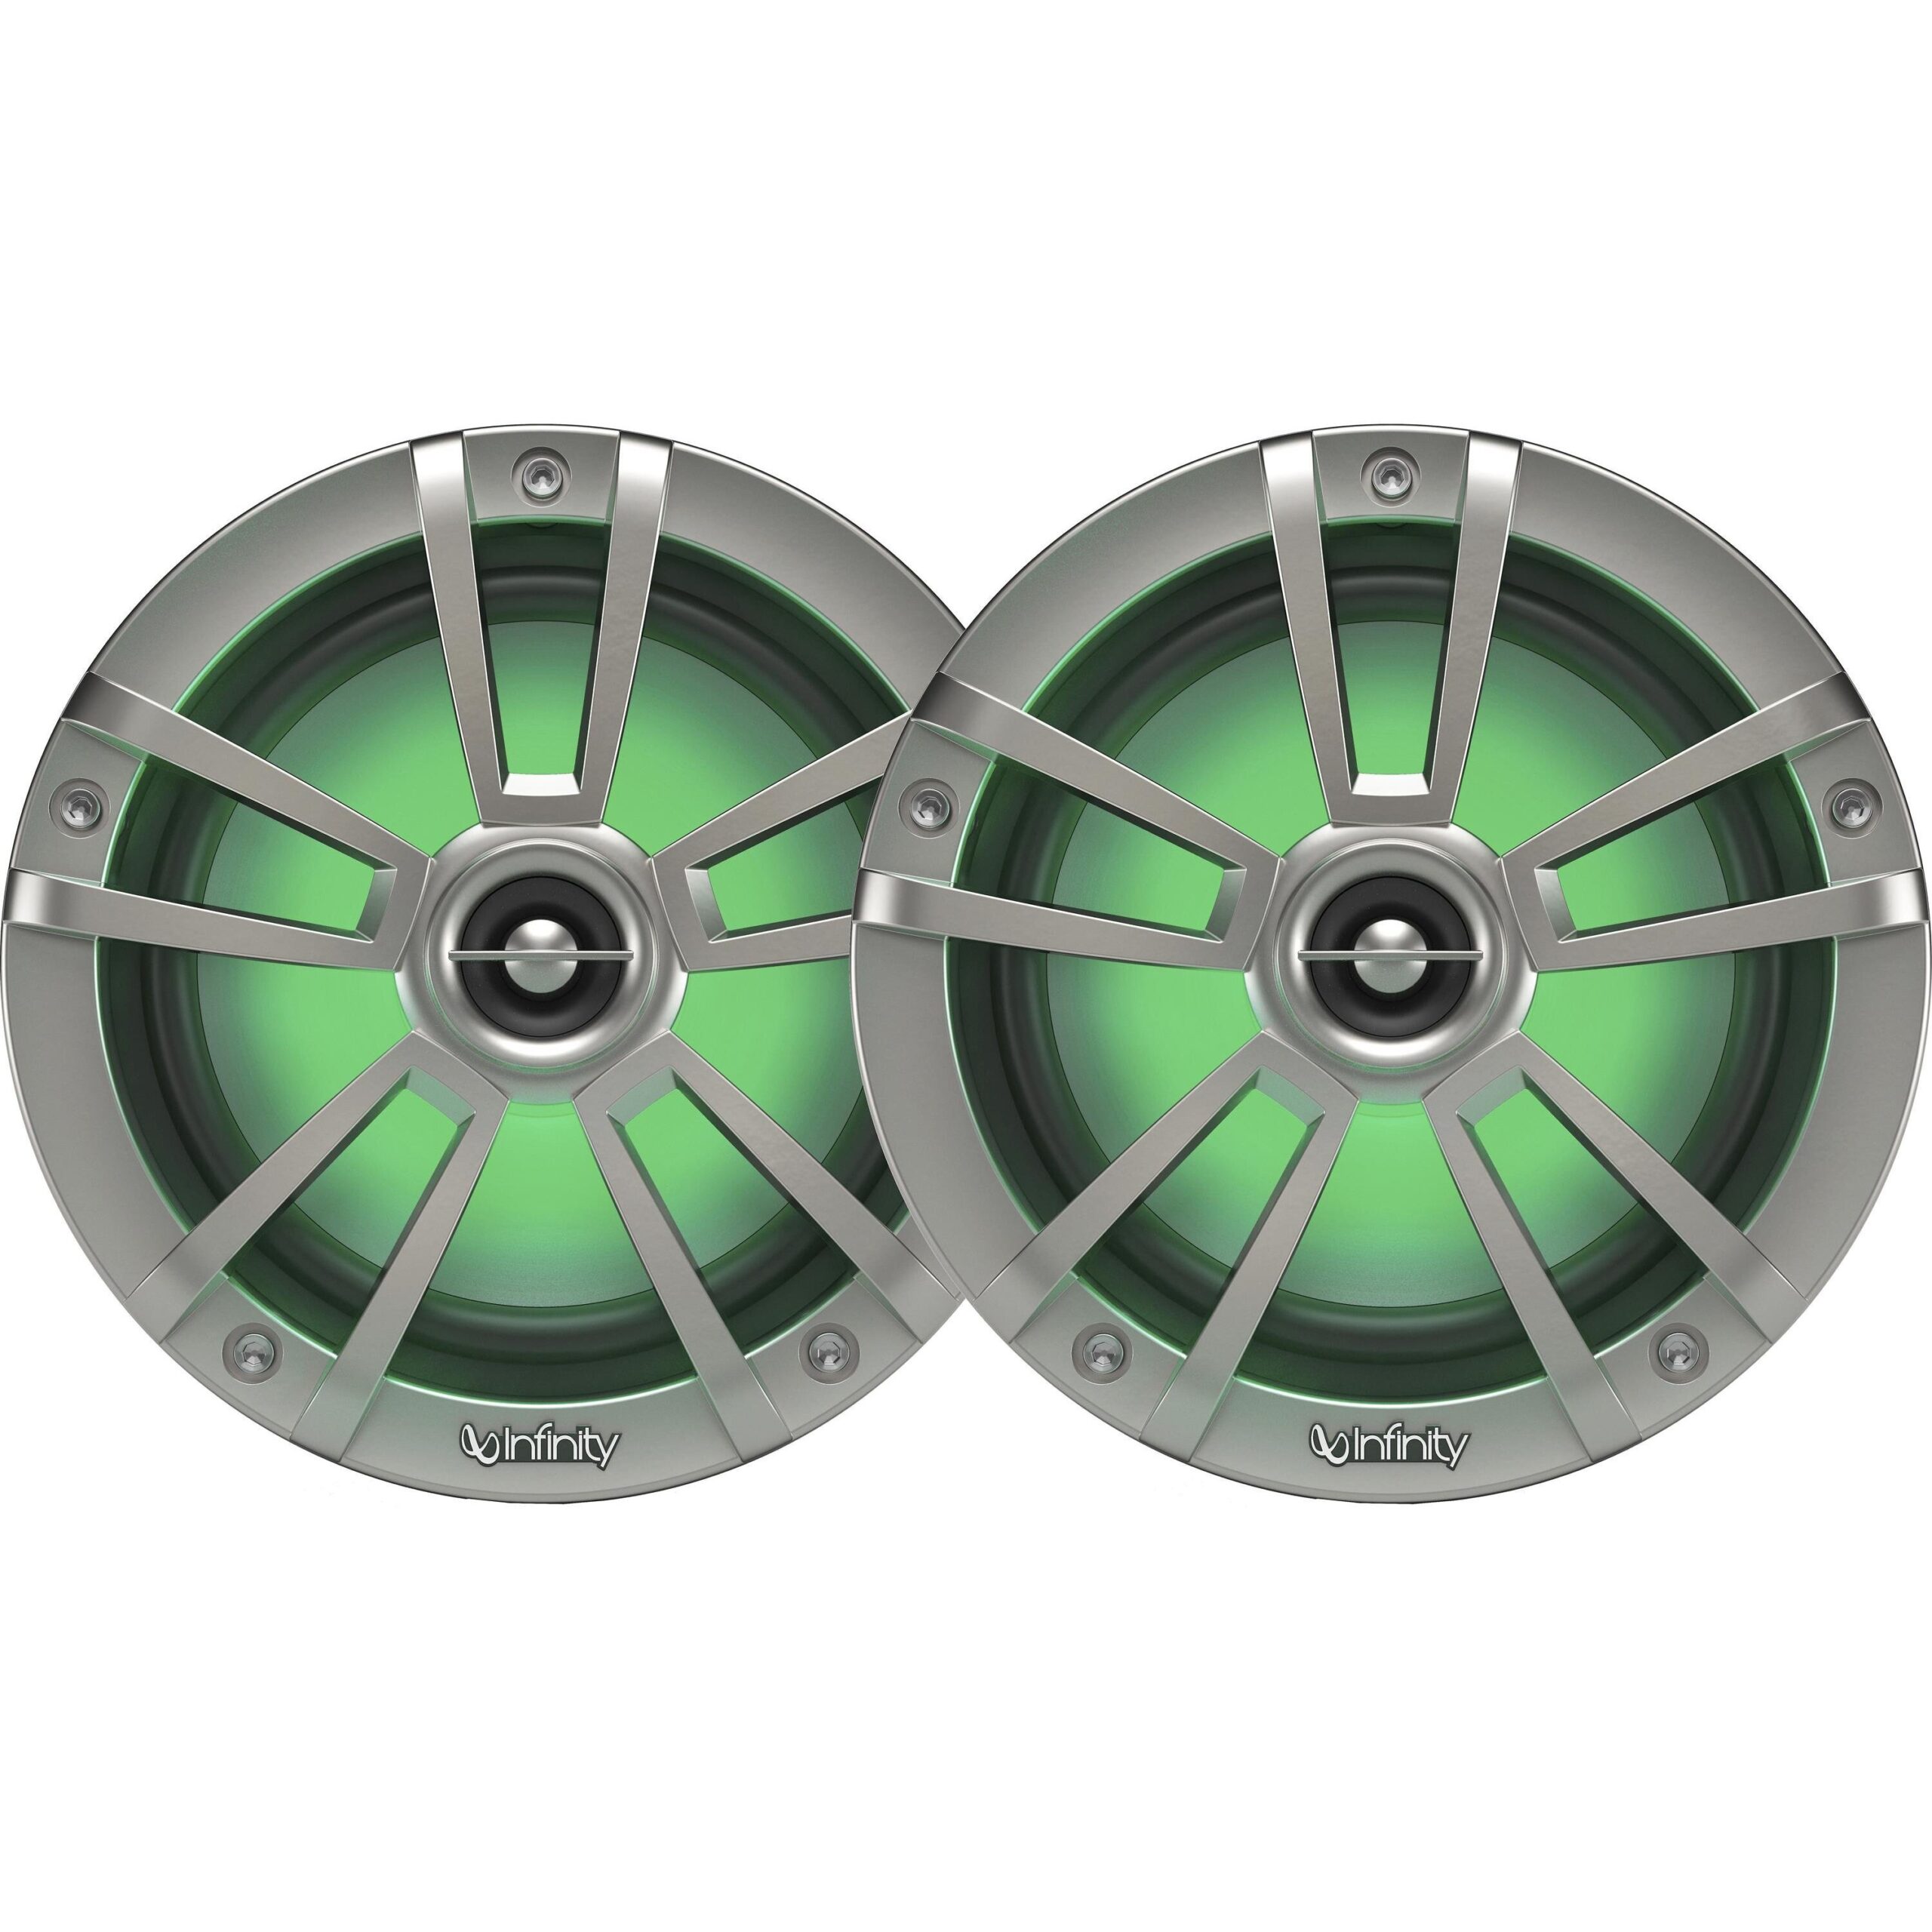 Infinity INF822MLT Titanium 8" Reference Series Coaxial 450 Watt Waterproof Marine Speakers With RGB LED Accent Lighting